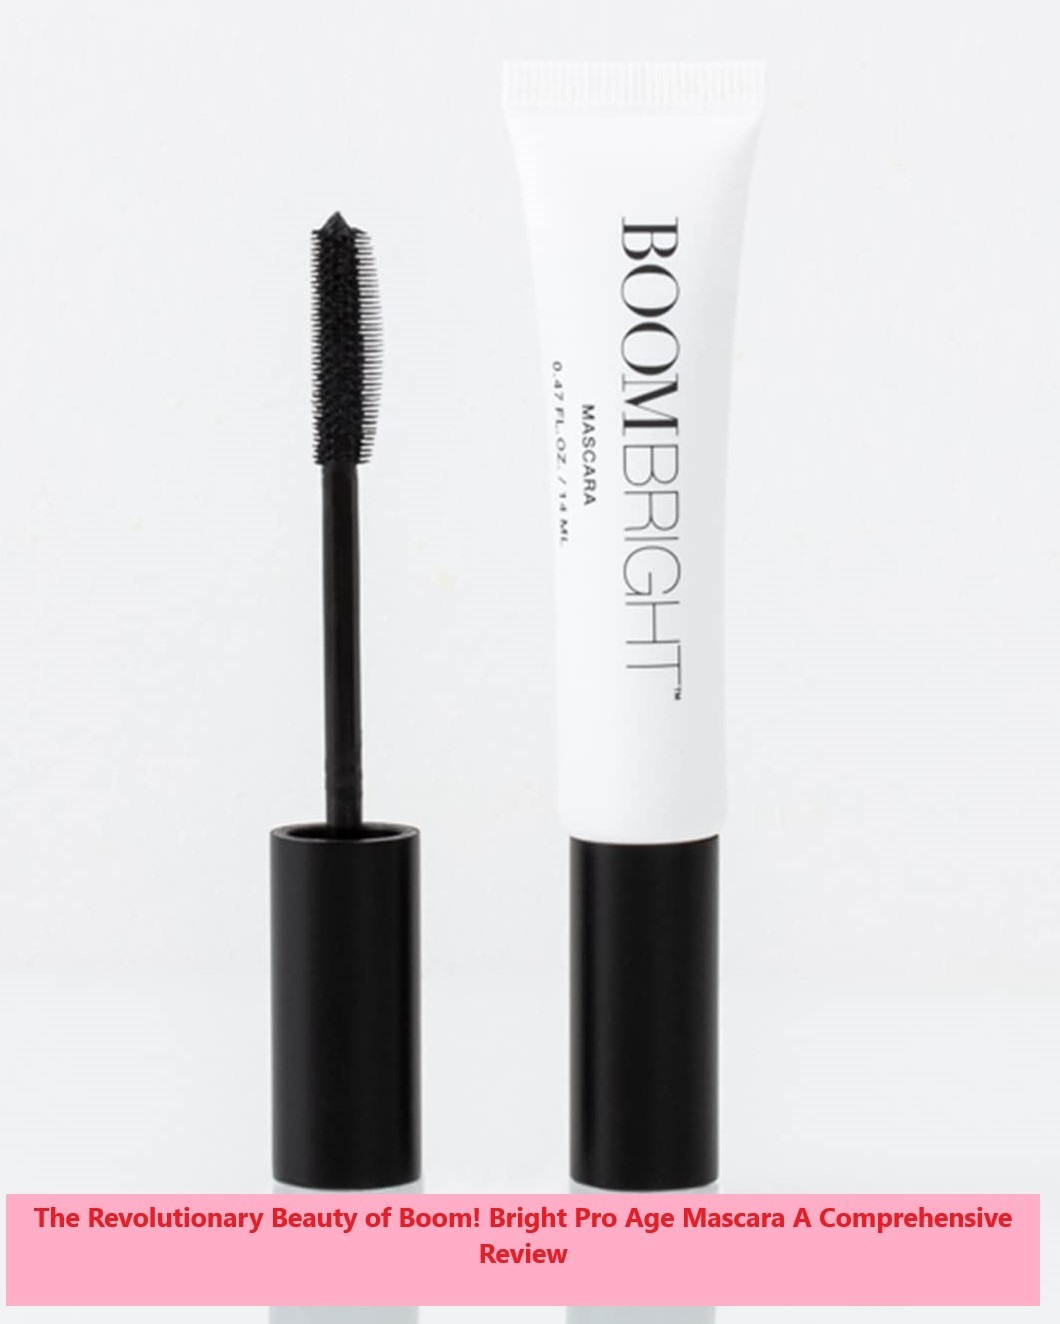 The-Revolutionary-Beauty-of-Boom-Bright-Pro-Age-Mascara-A-Comprehensive-Review